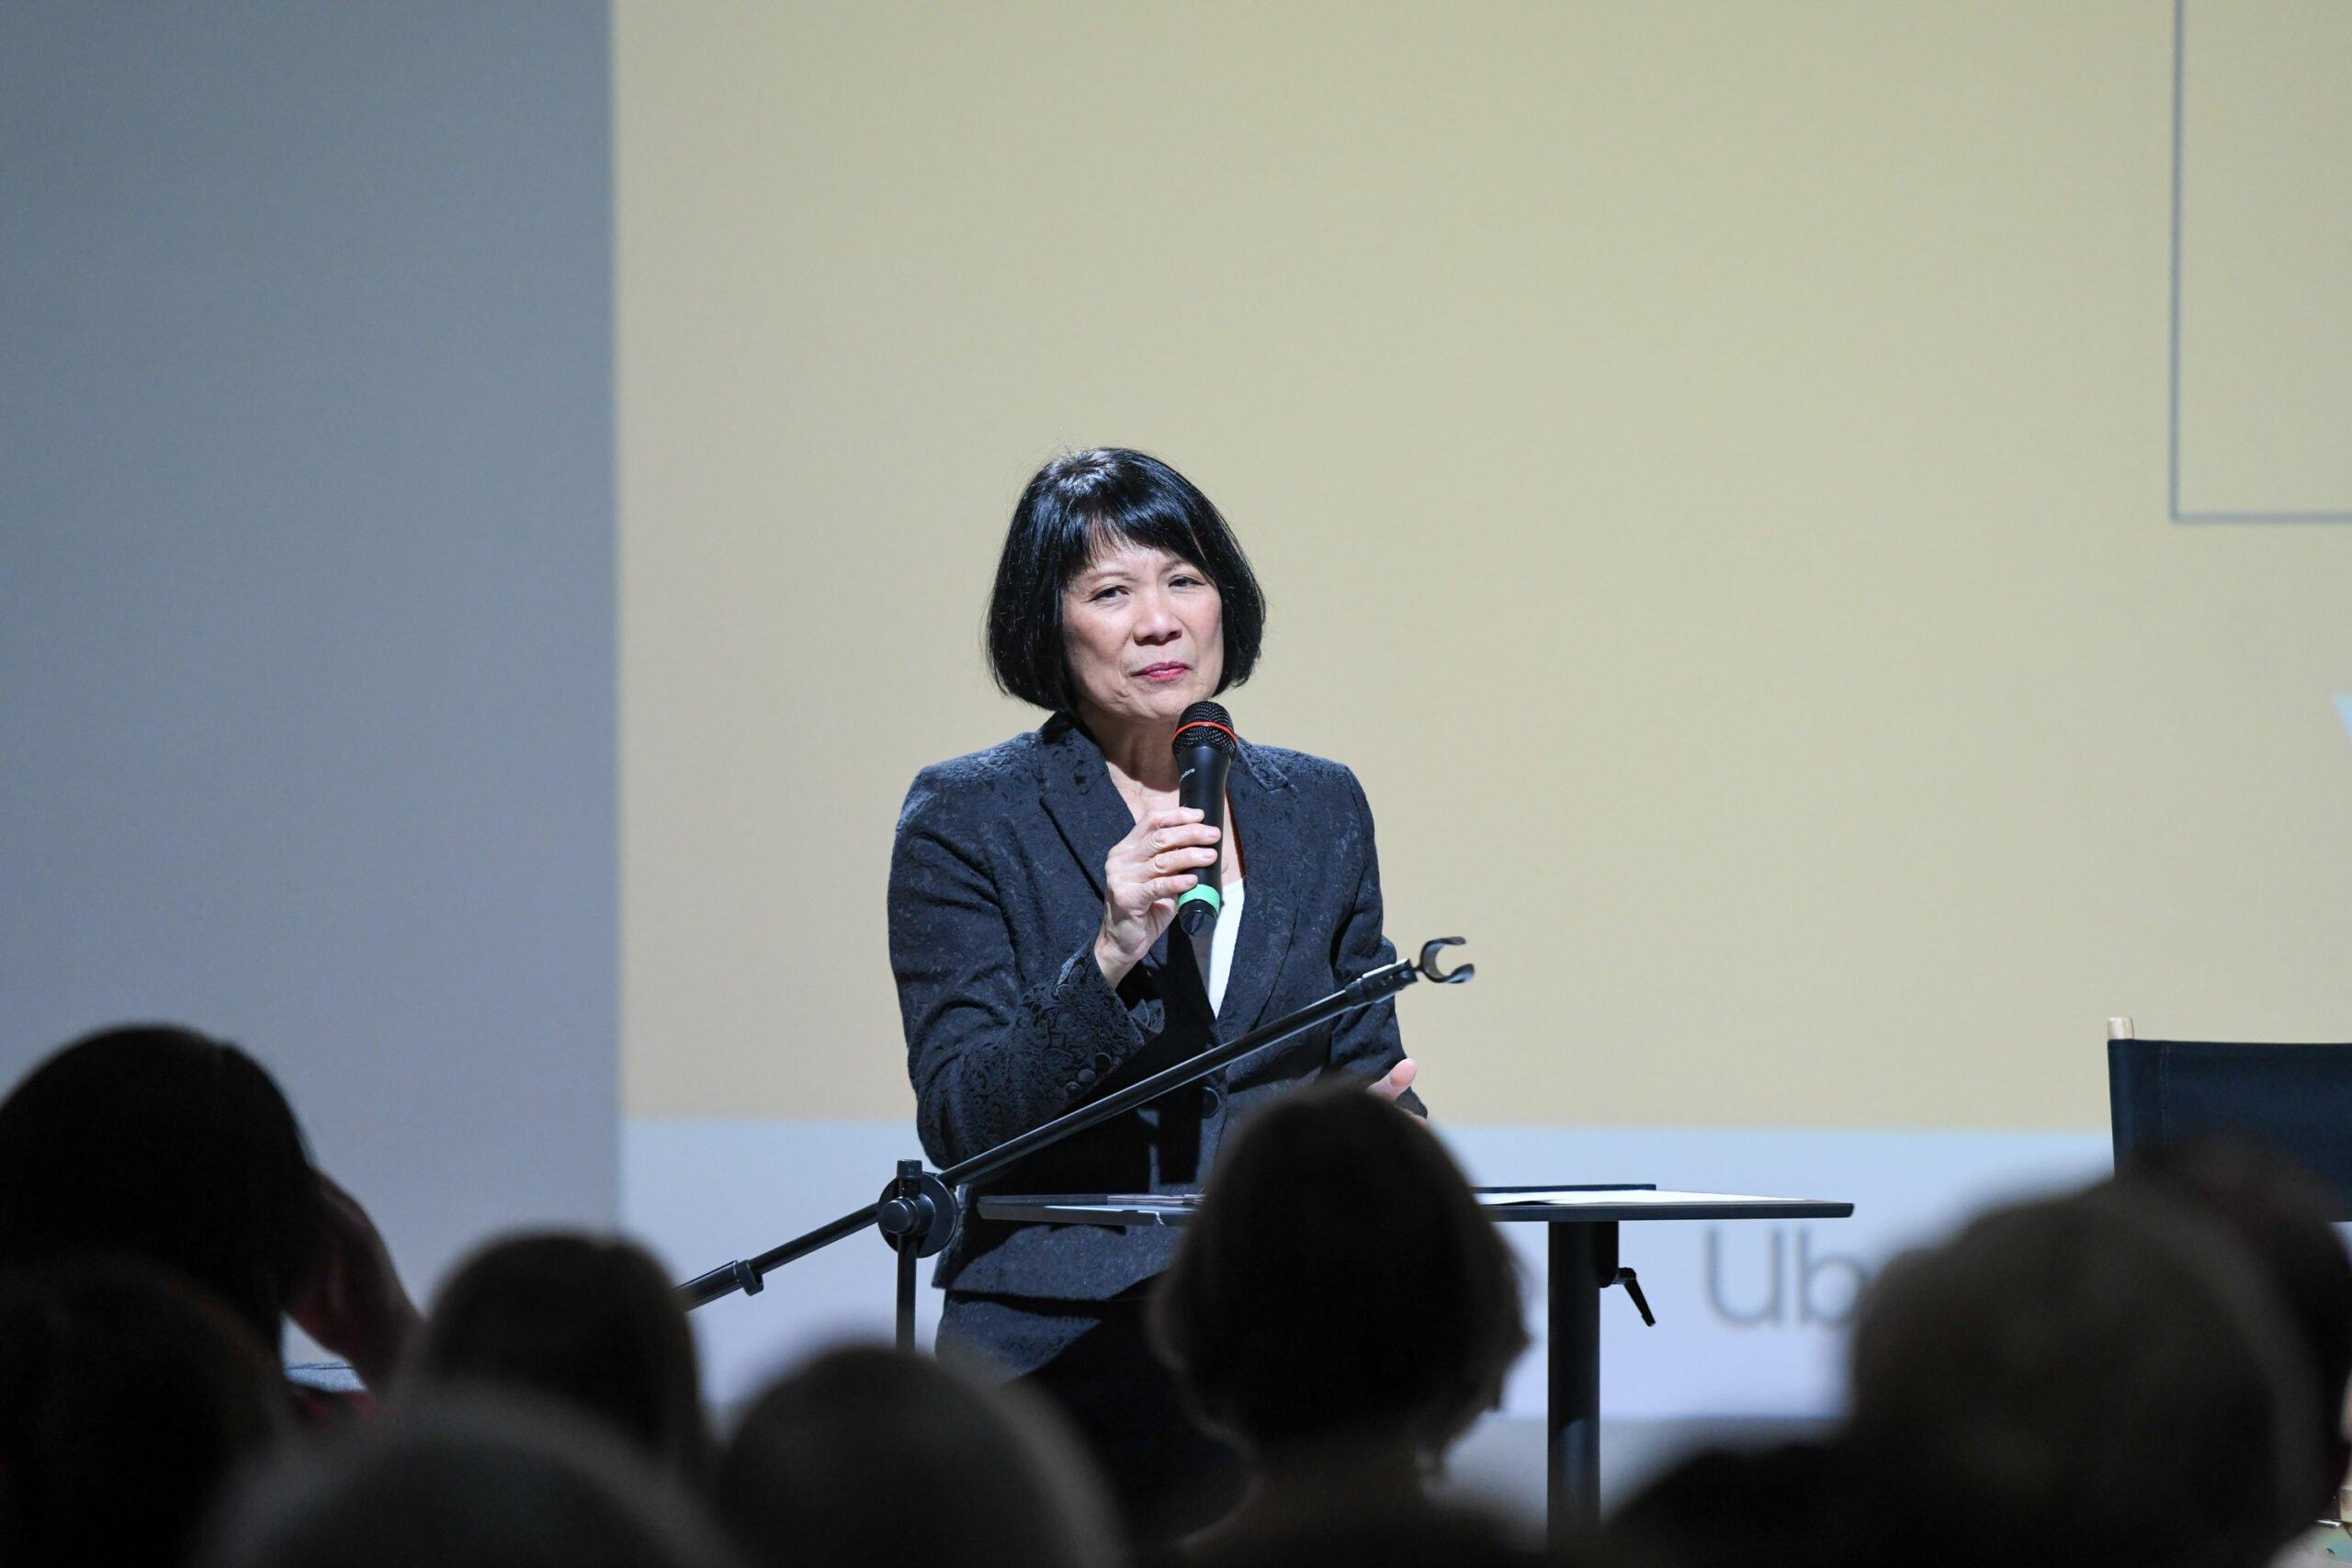 Olivia Chow, mayor of Toronto, giving the keynote address at the Macleanâs Ideas Summit: Year Ahead.